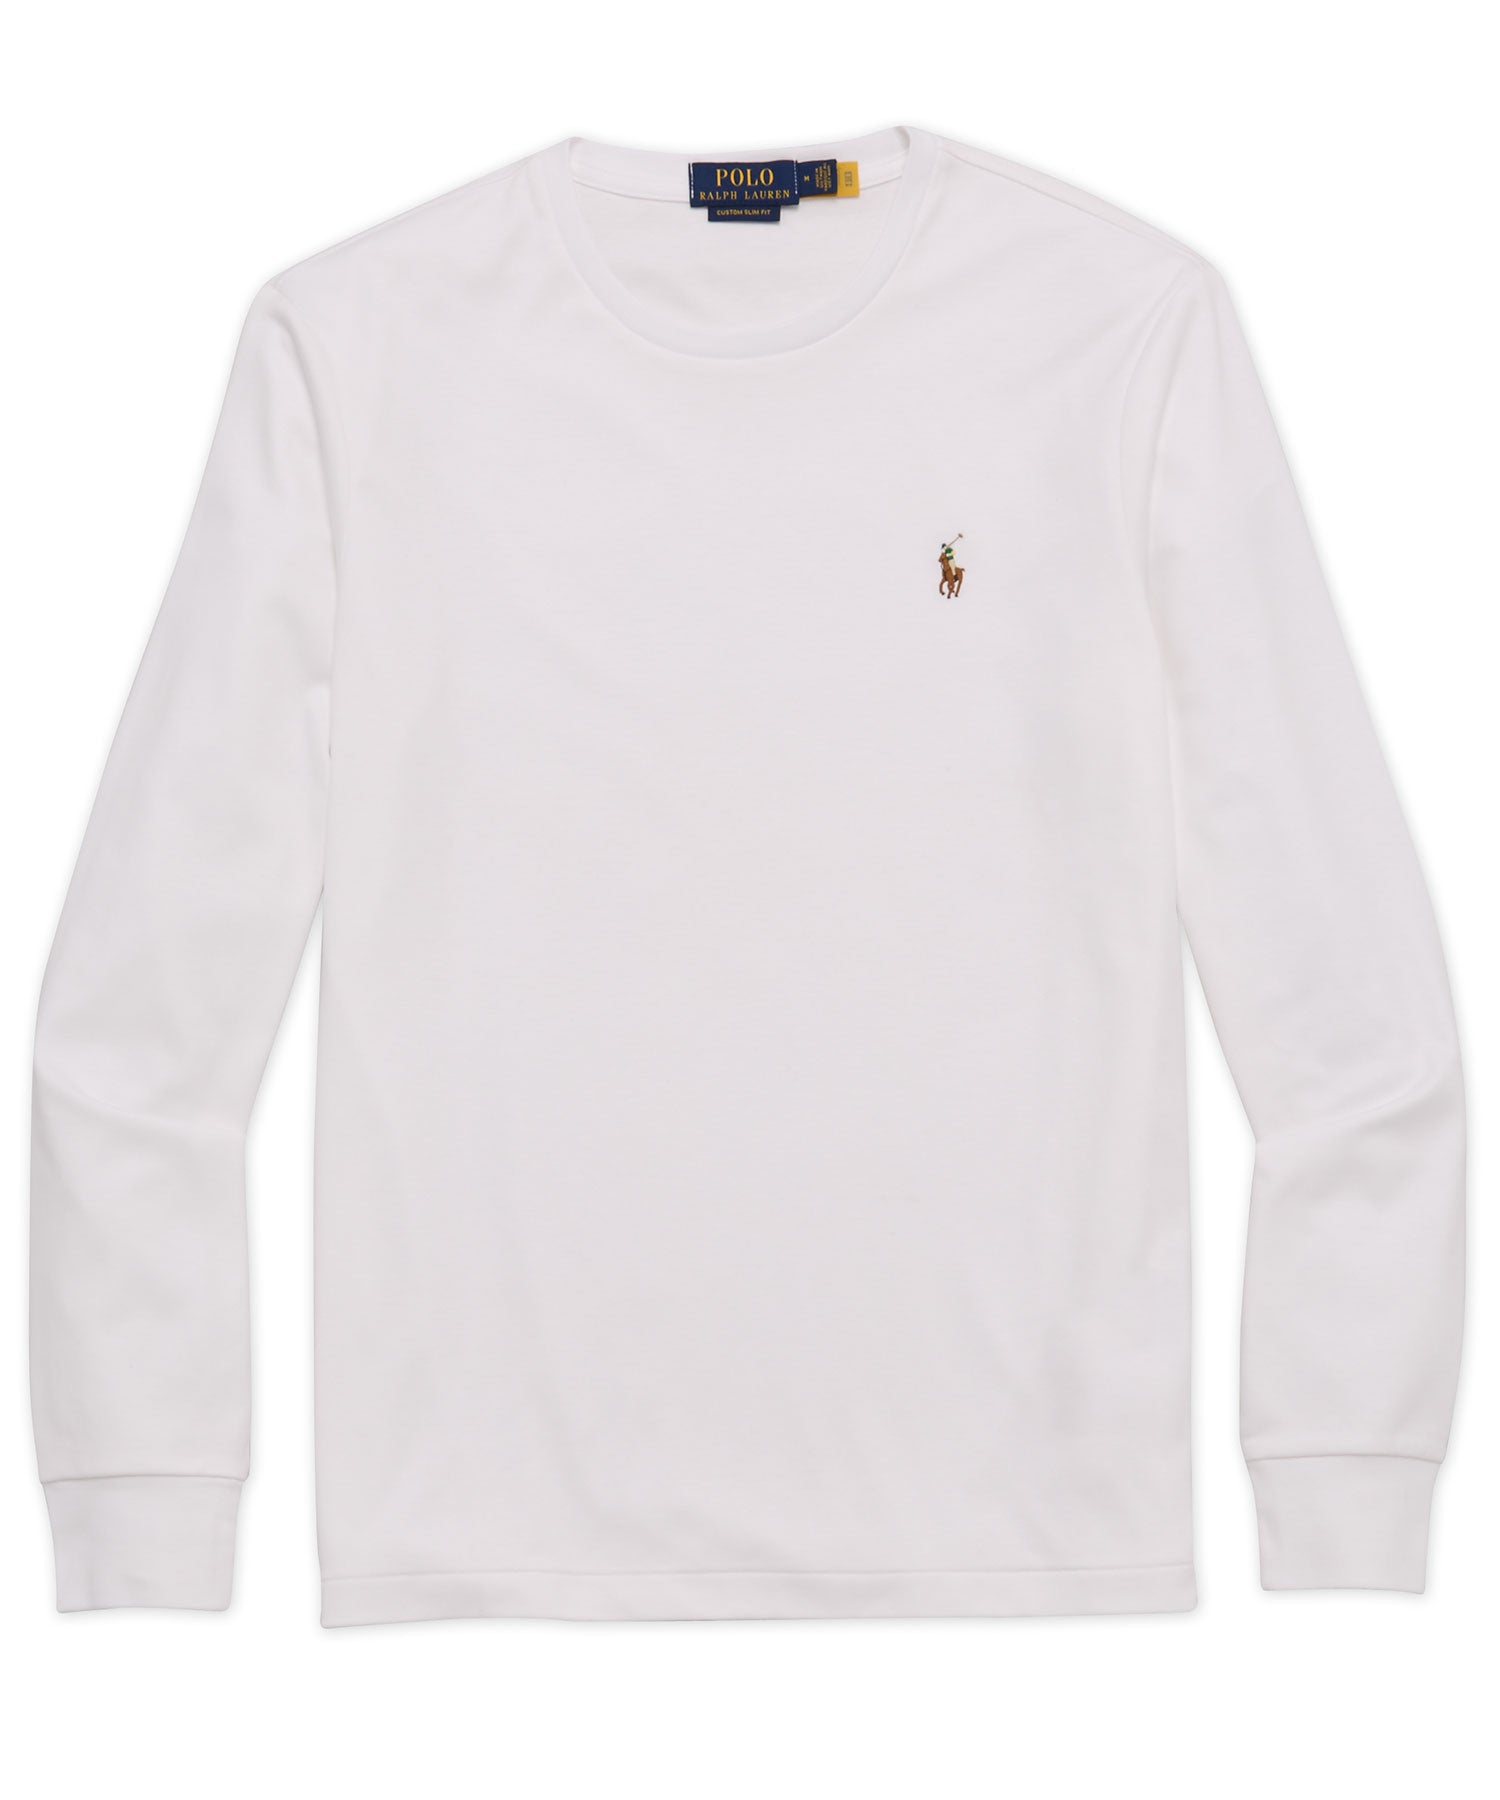 Polo Ralph Lauren Big And Tall Long-Sleeve V-Neck T-Shirt in White